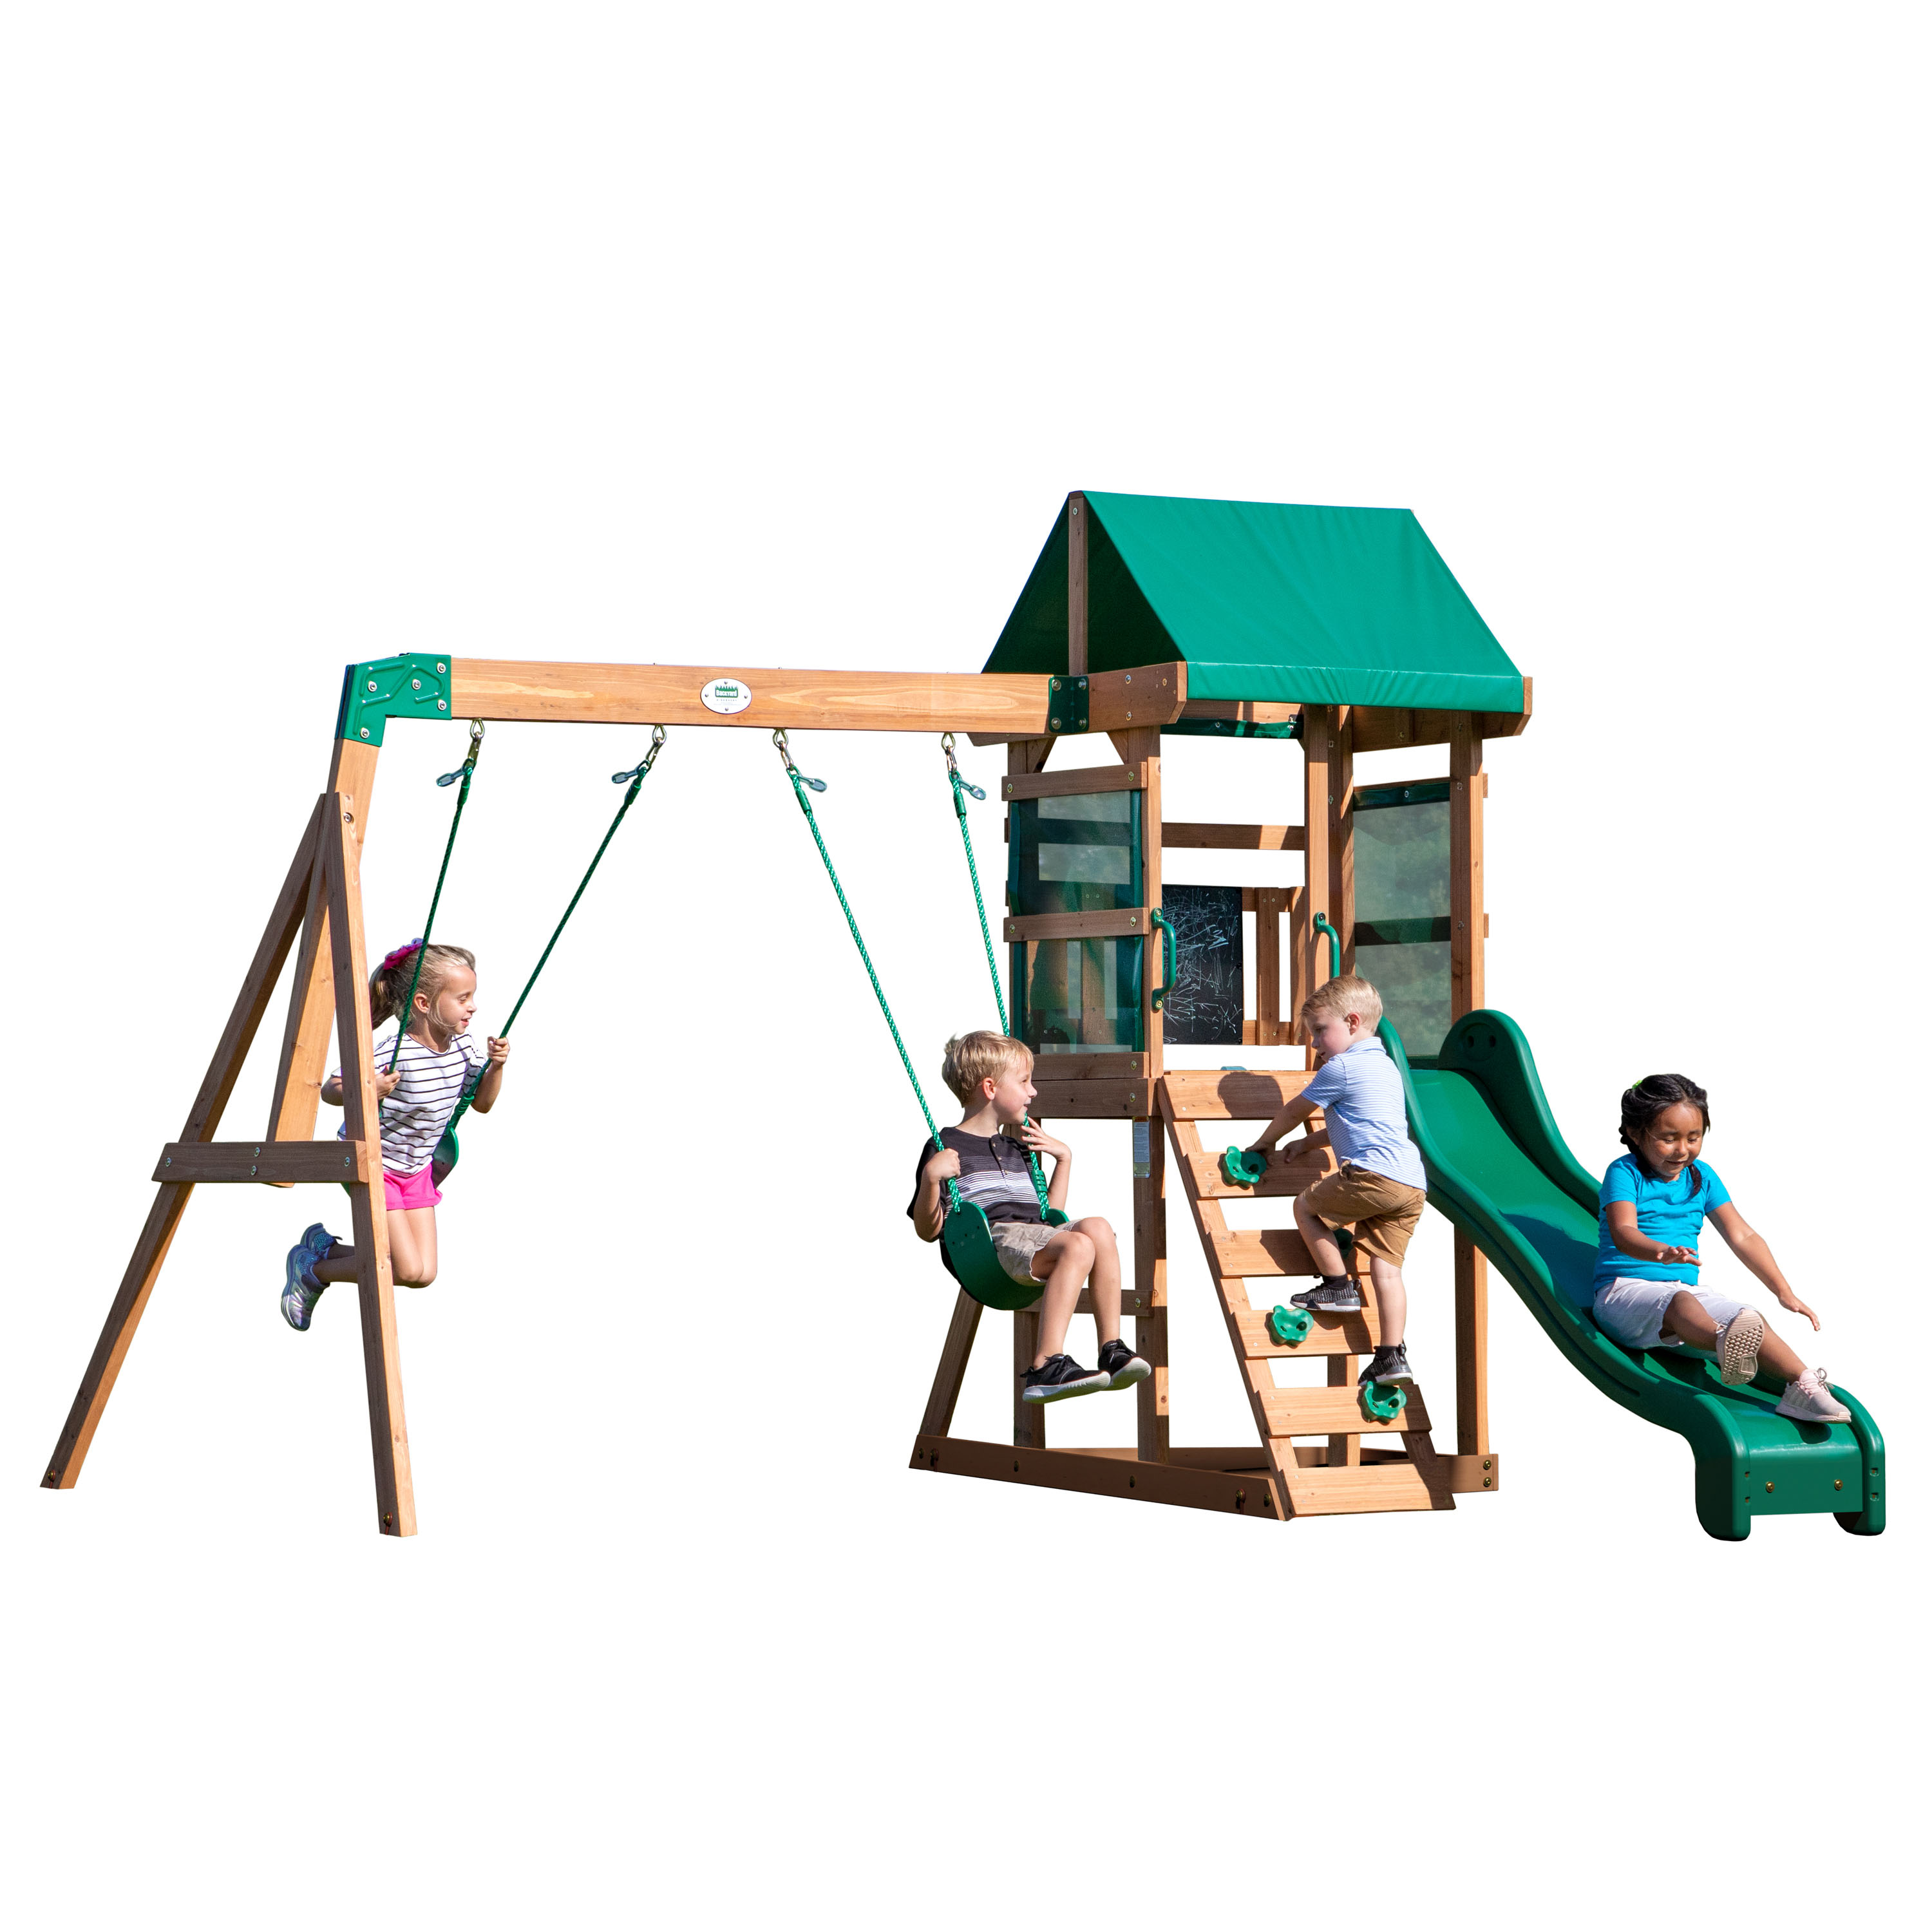 NEW 30 x 85 1/2" Play Set Green Tarp Fits Leisure Time Sold at Lowe's 